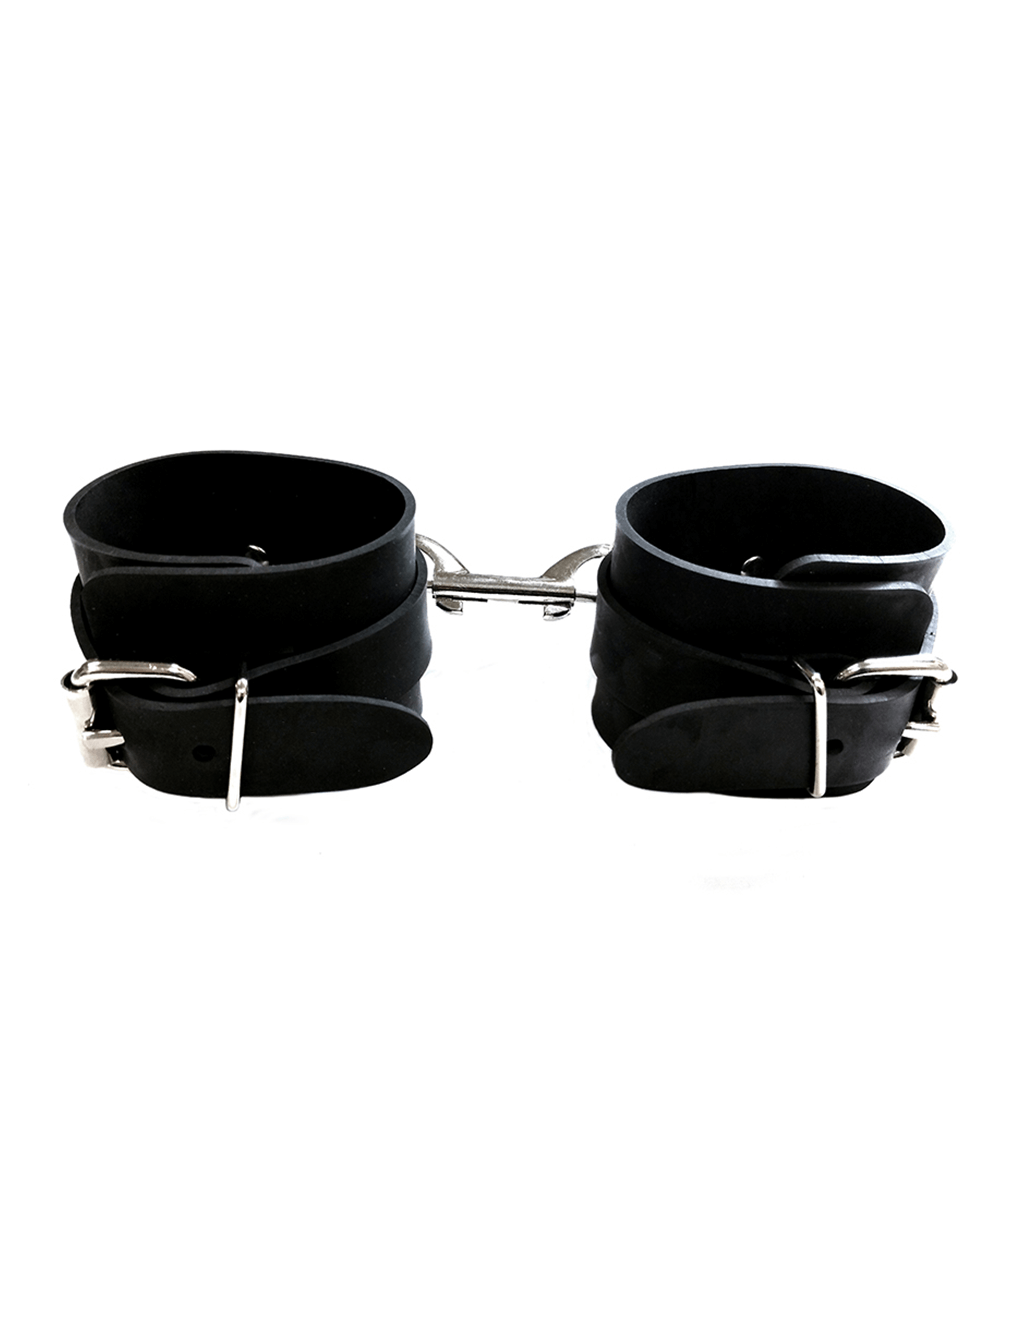 Rouge Rubber Ankle Cuffs - Black - Back